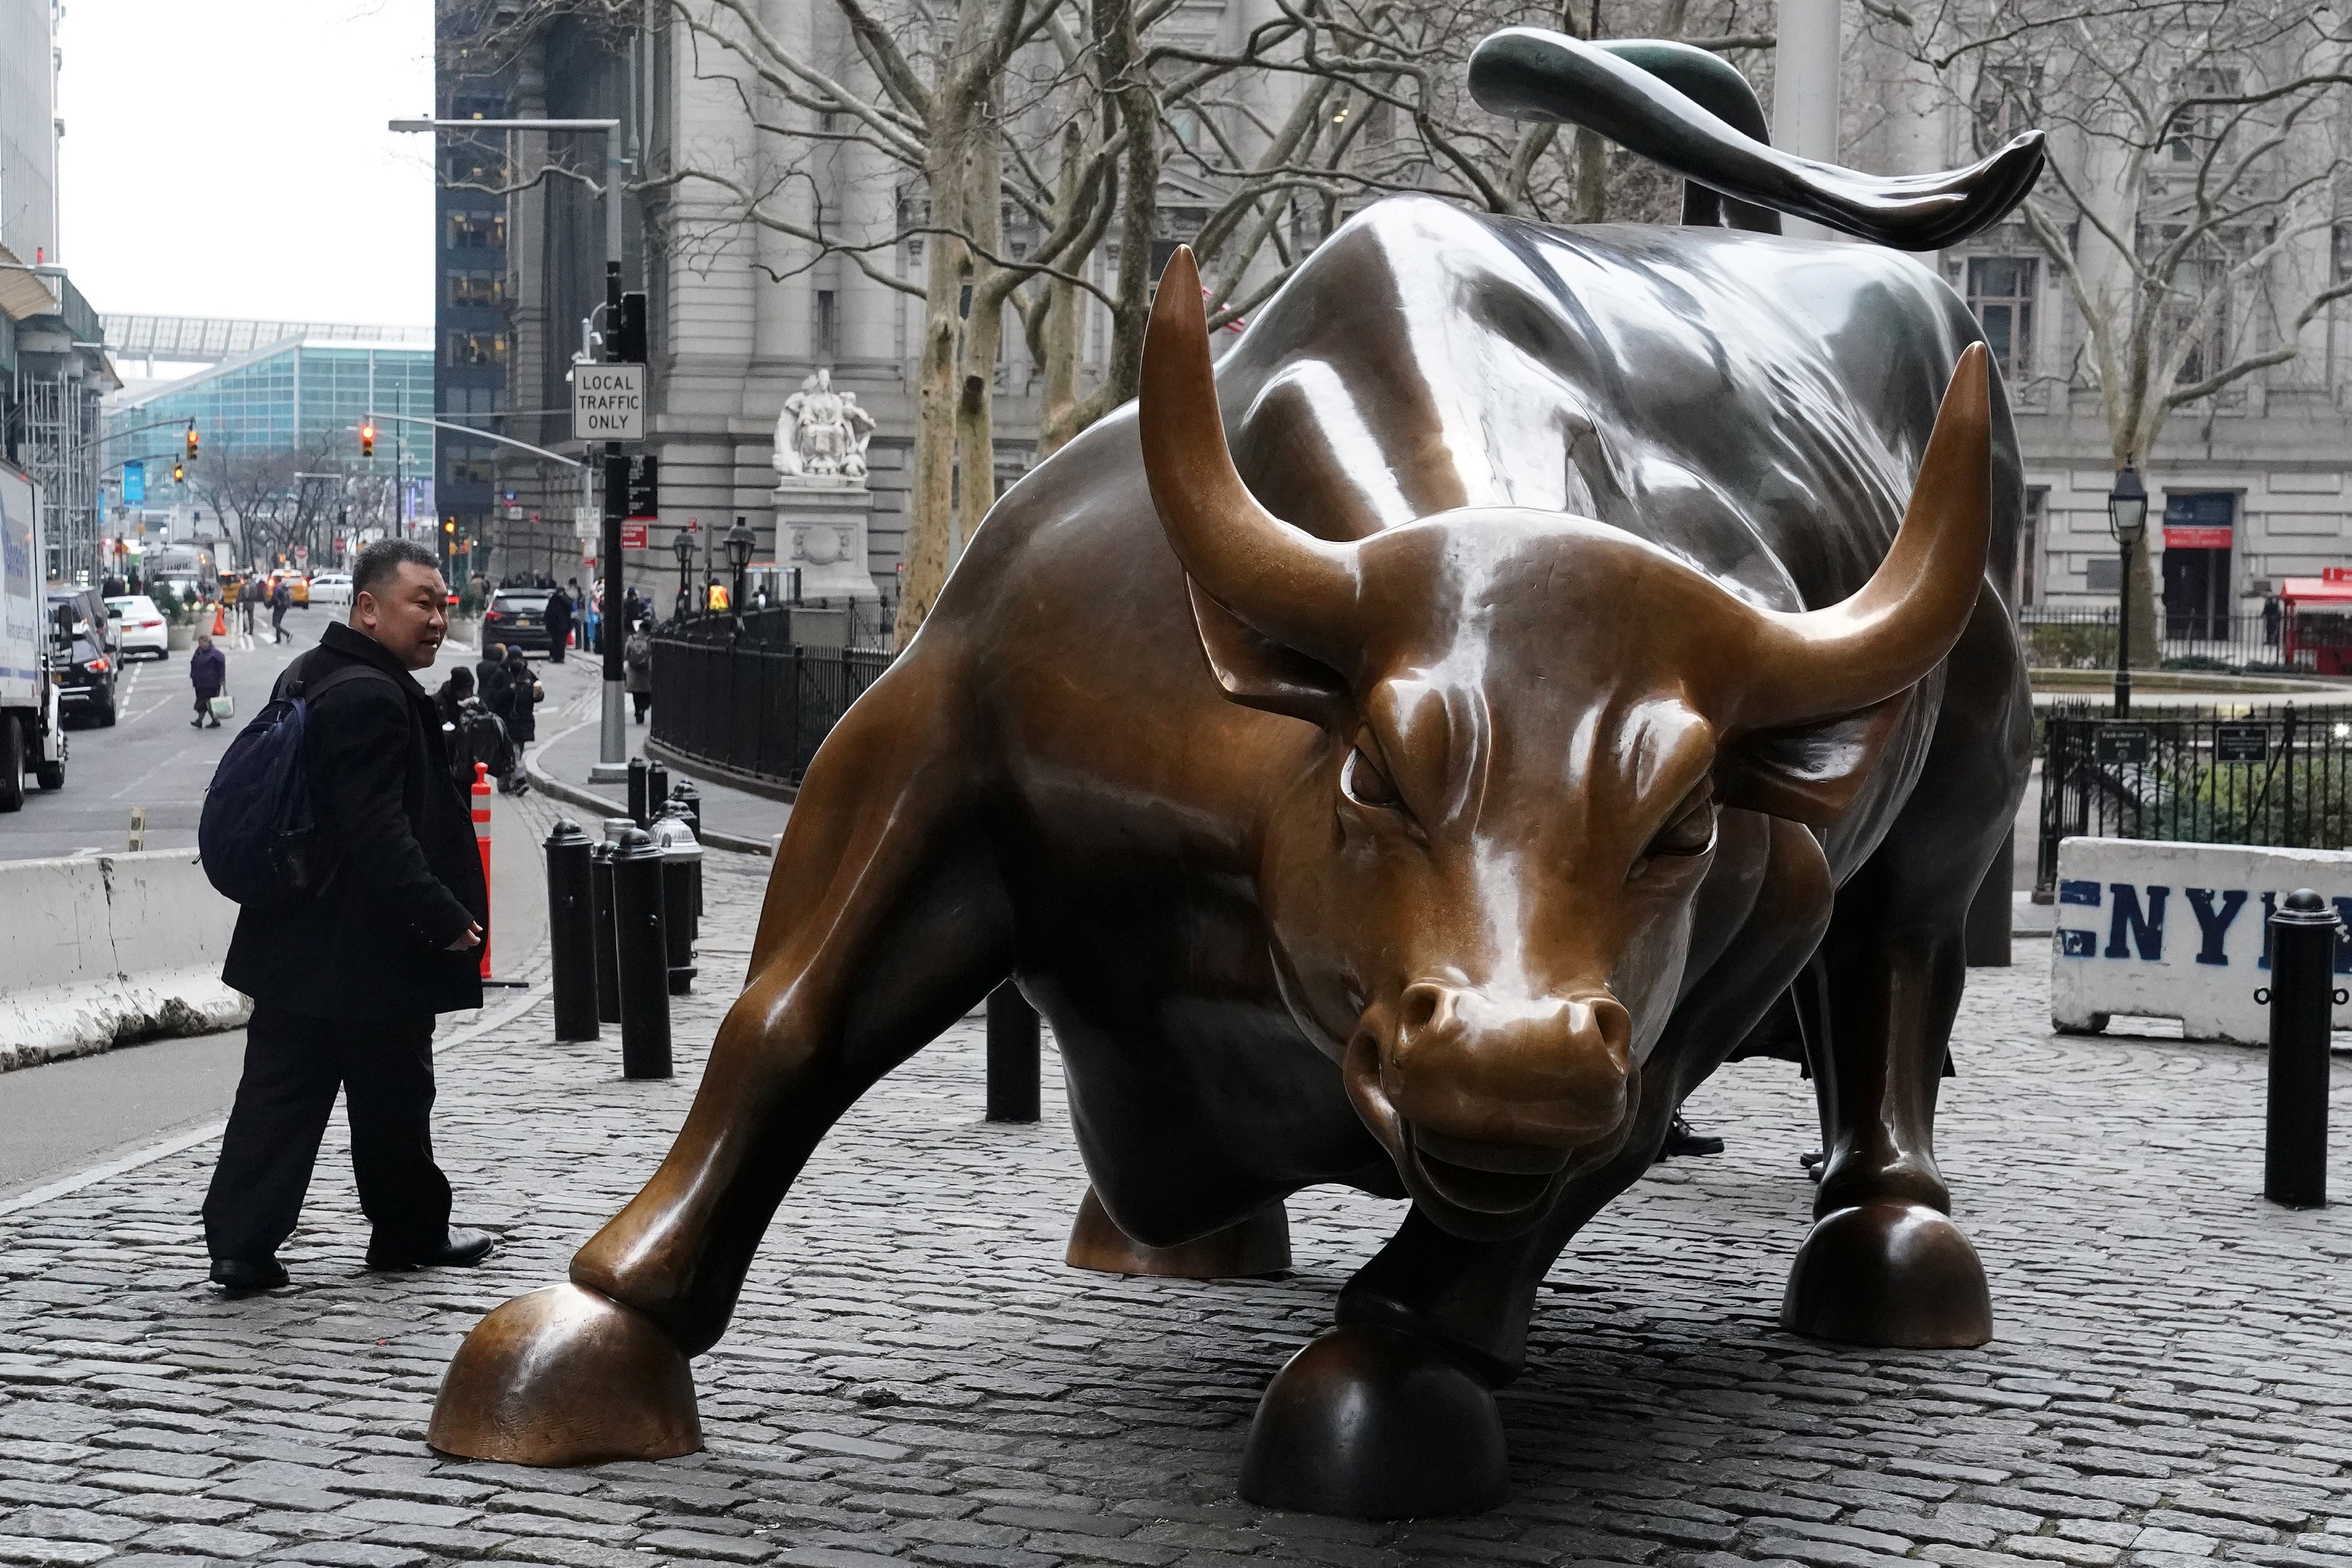 The Charging Bull or Wall Street Bull is pictured in New York City on January 16, 2019. Photo: Reuters